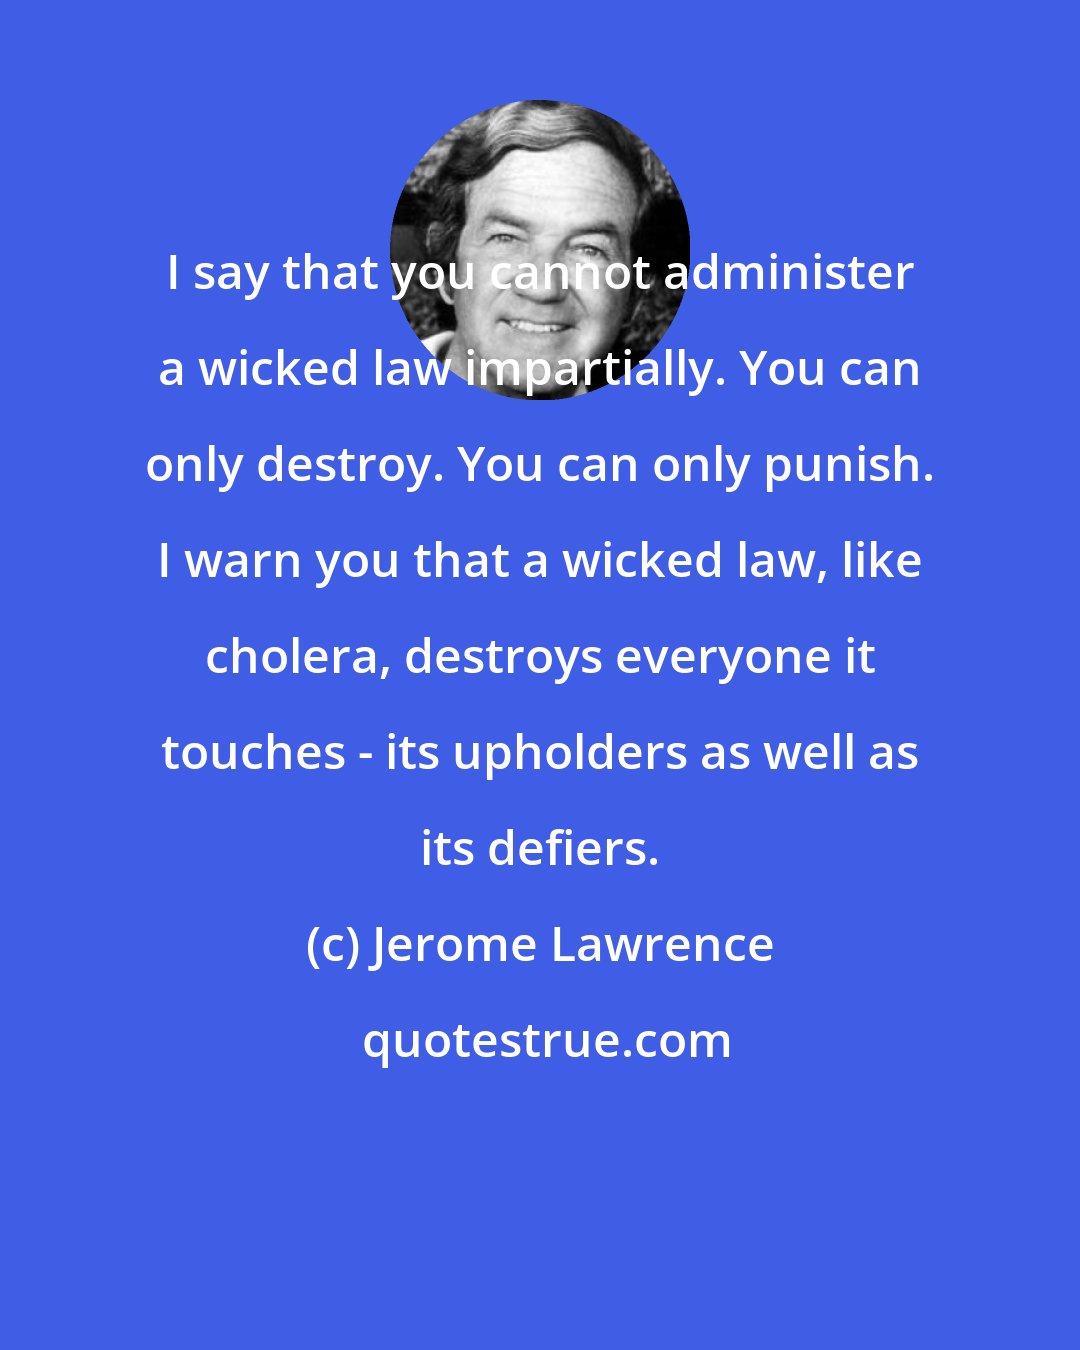 Jerome Lawrence: I say that you cannot administer a wicked law impartially. You can only destroy. You can only punish. I warn you that a wicked law, like cholera, destroys everyone it touches - its upholders as well as its defiers.